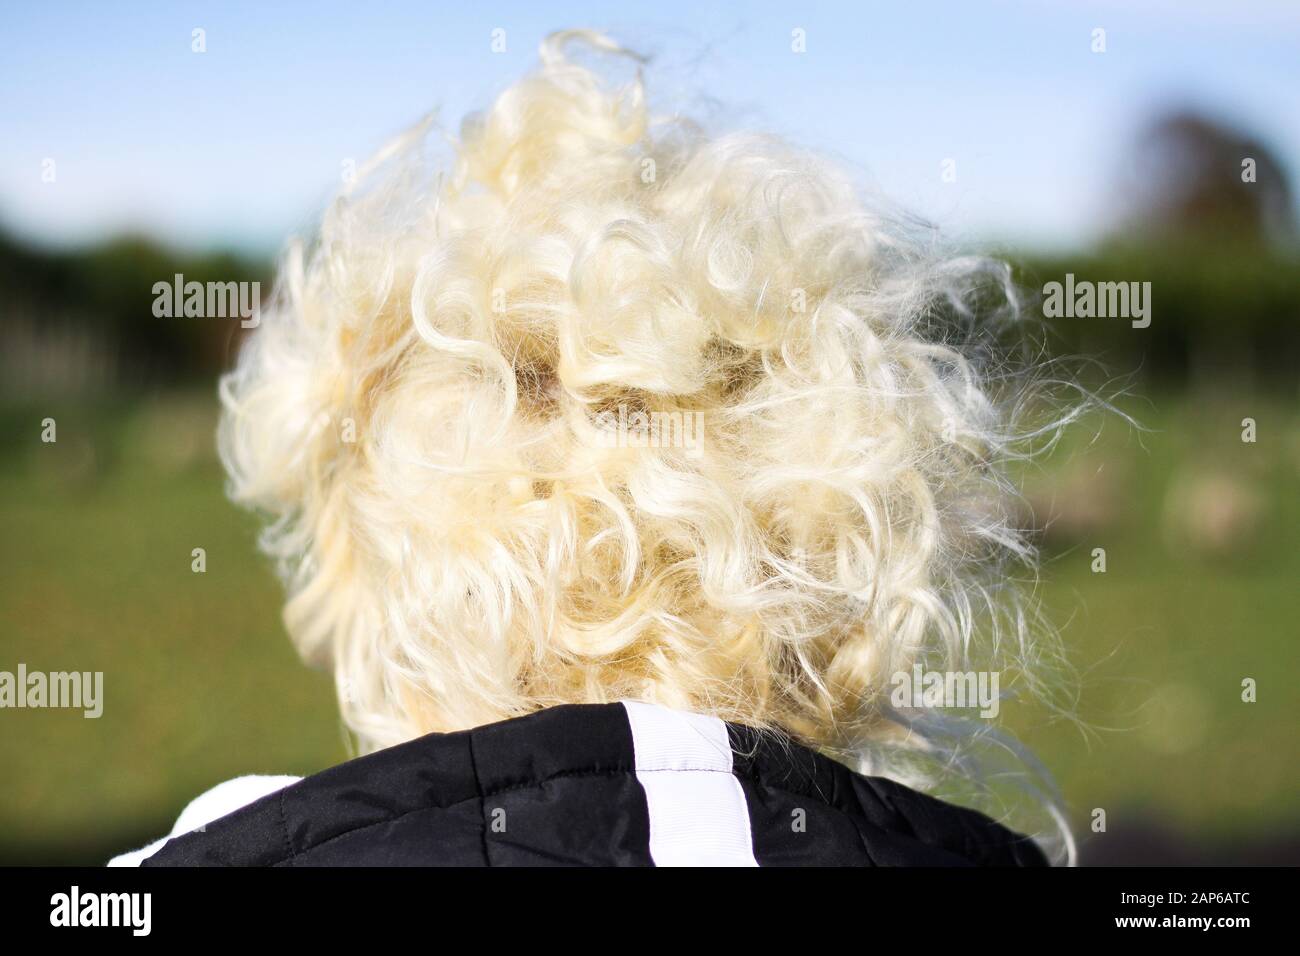 Close up view from behind on isolated head of woman with bright white blonde curly hair. Blurred rural landscape background. Stock Photo